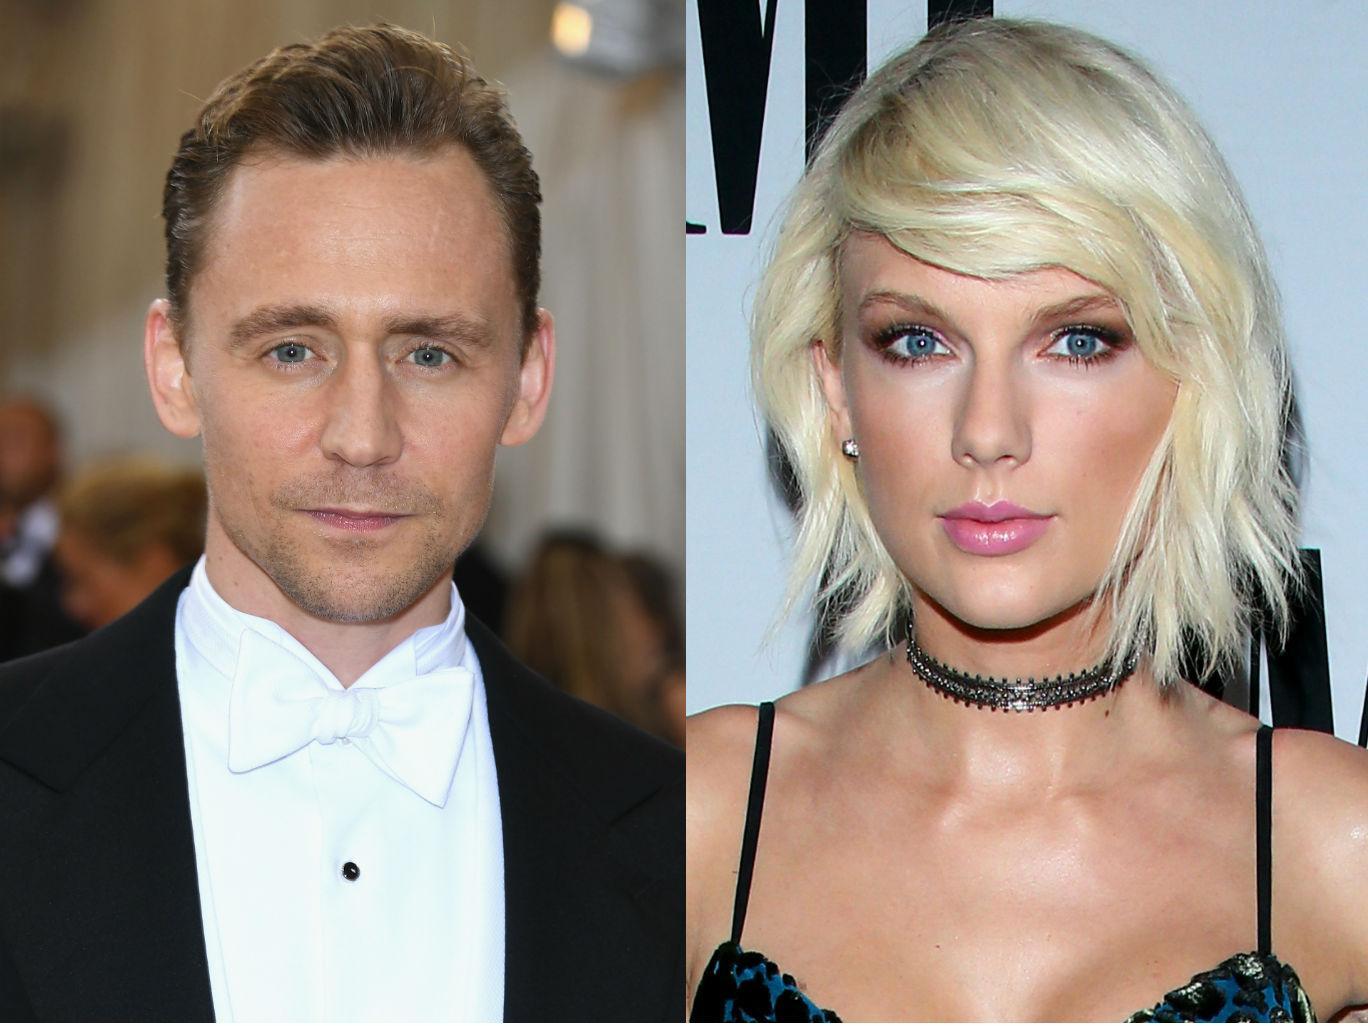 Tom Hiddleston explains why he wore that 'I love Taylor Swift' vest - The Independent